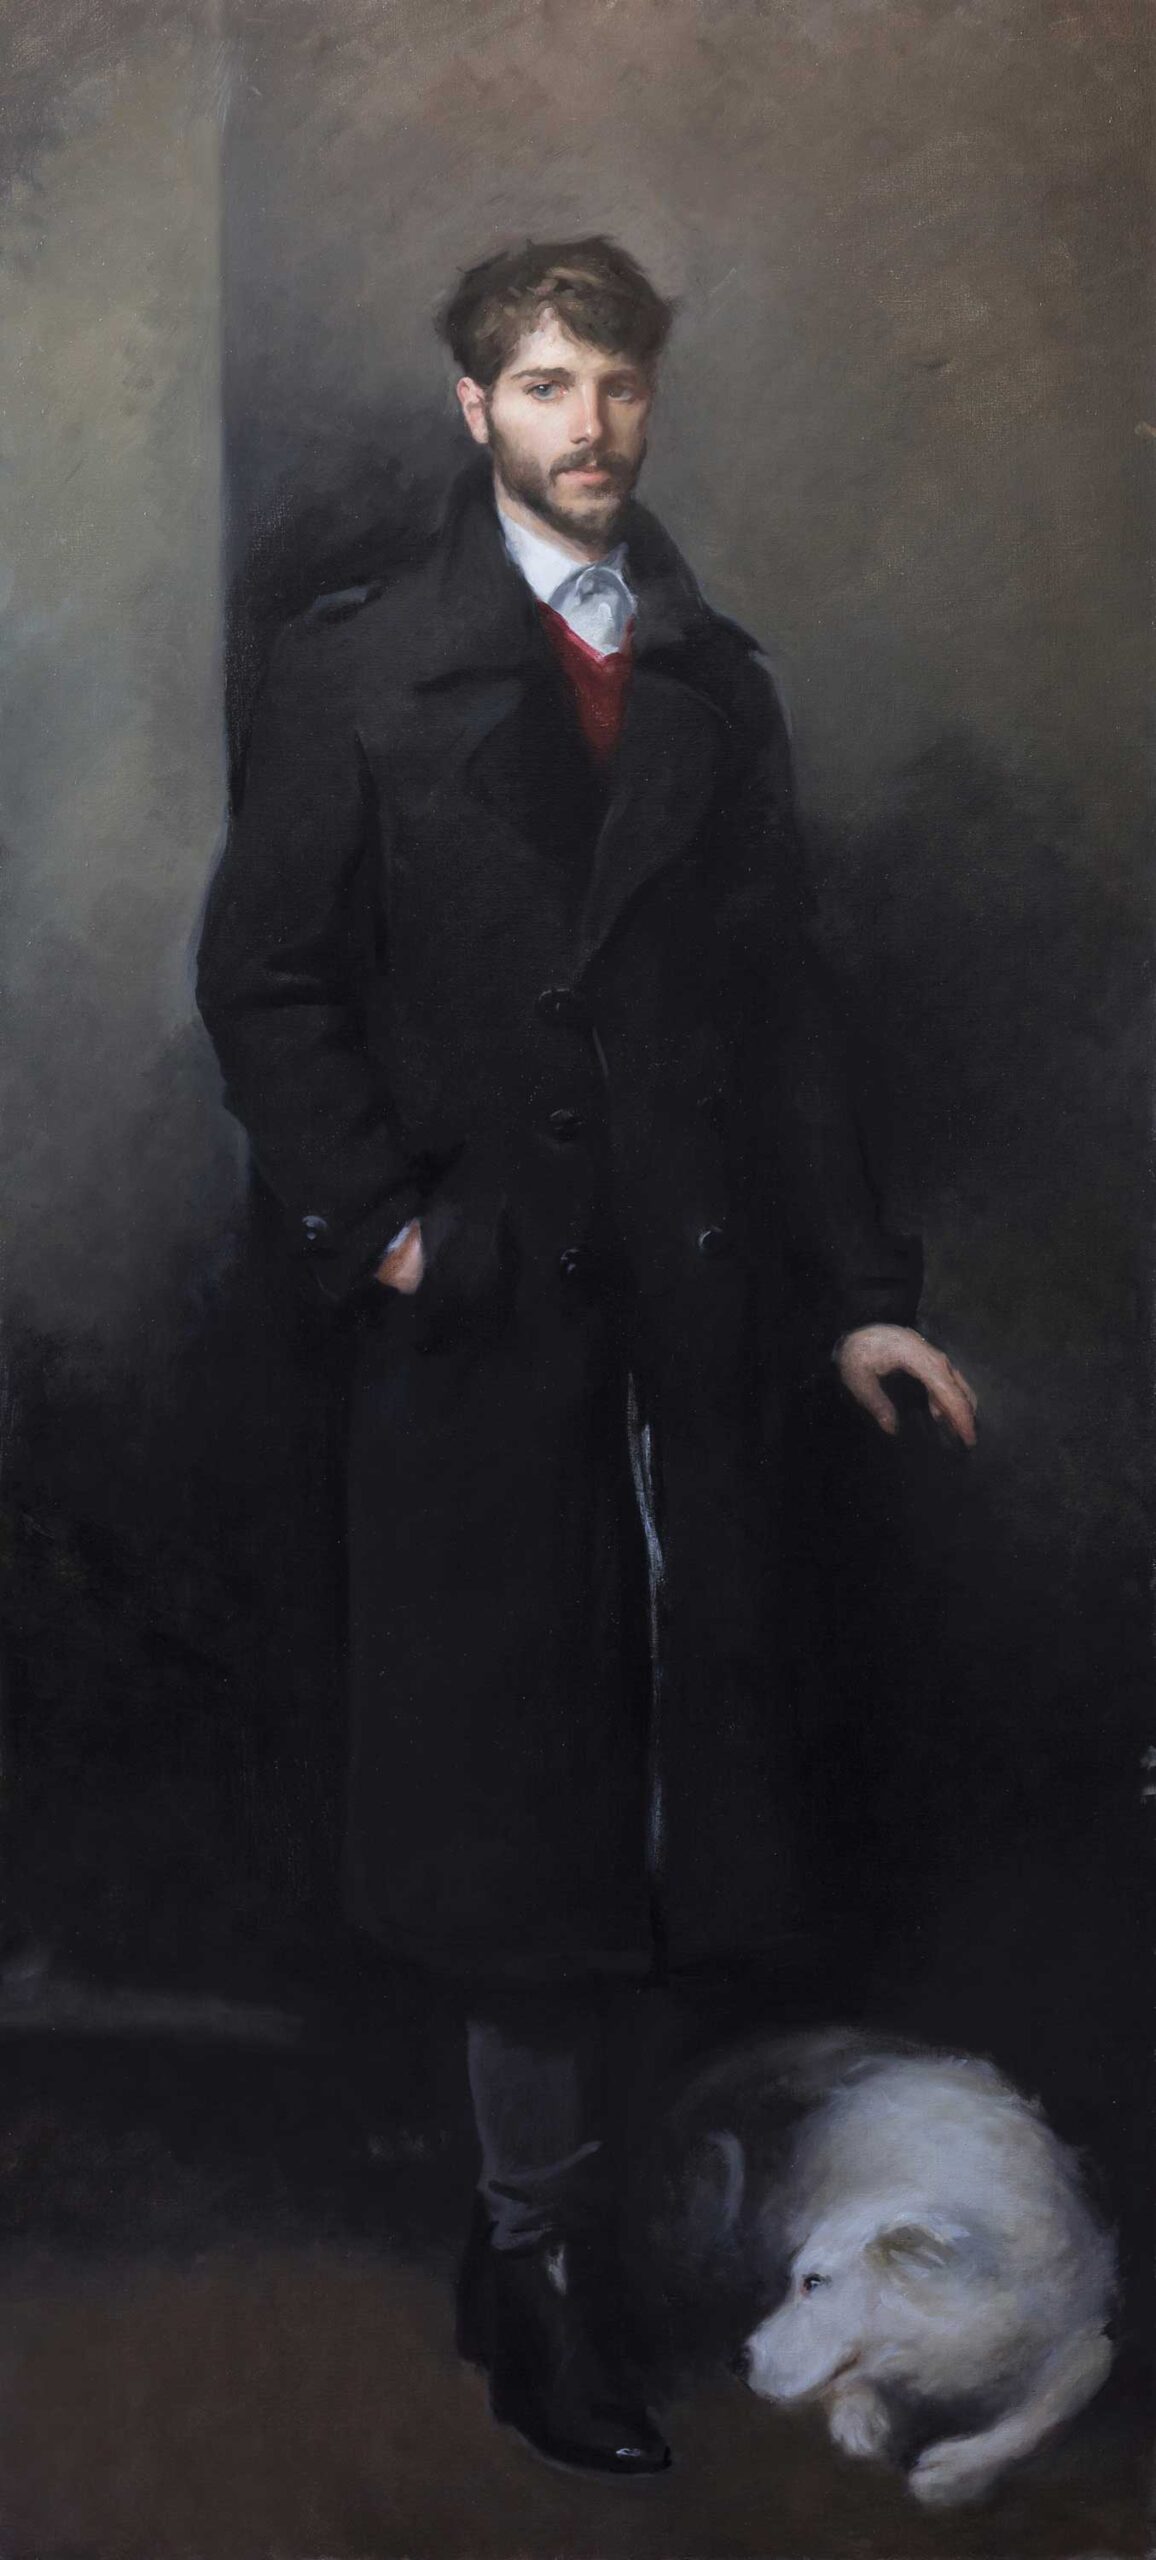 Tom Richards, "CdM, Sprezzatura," 2015, oil on canvas, 88 x 40 in., available through the artist